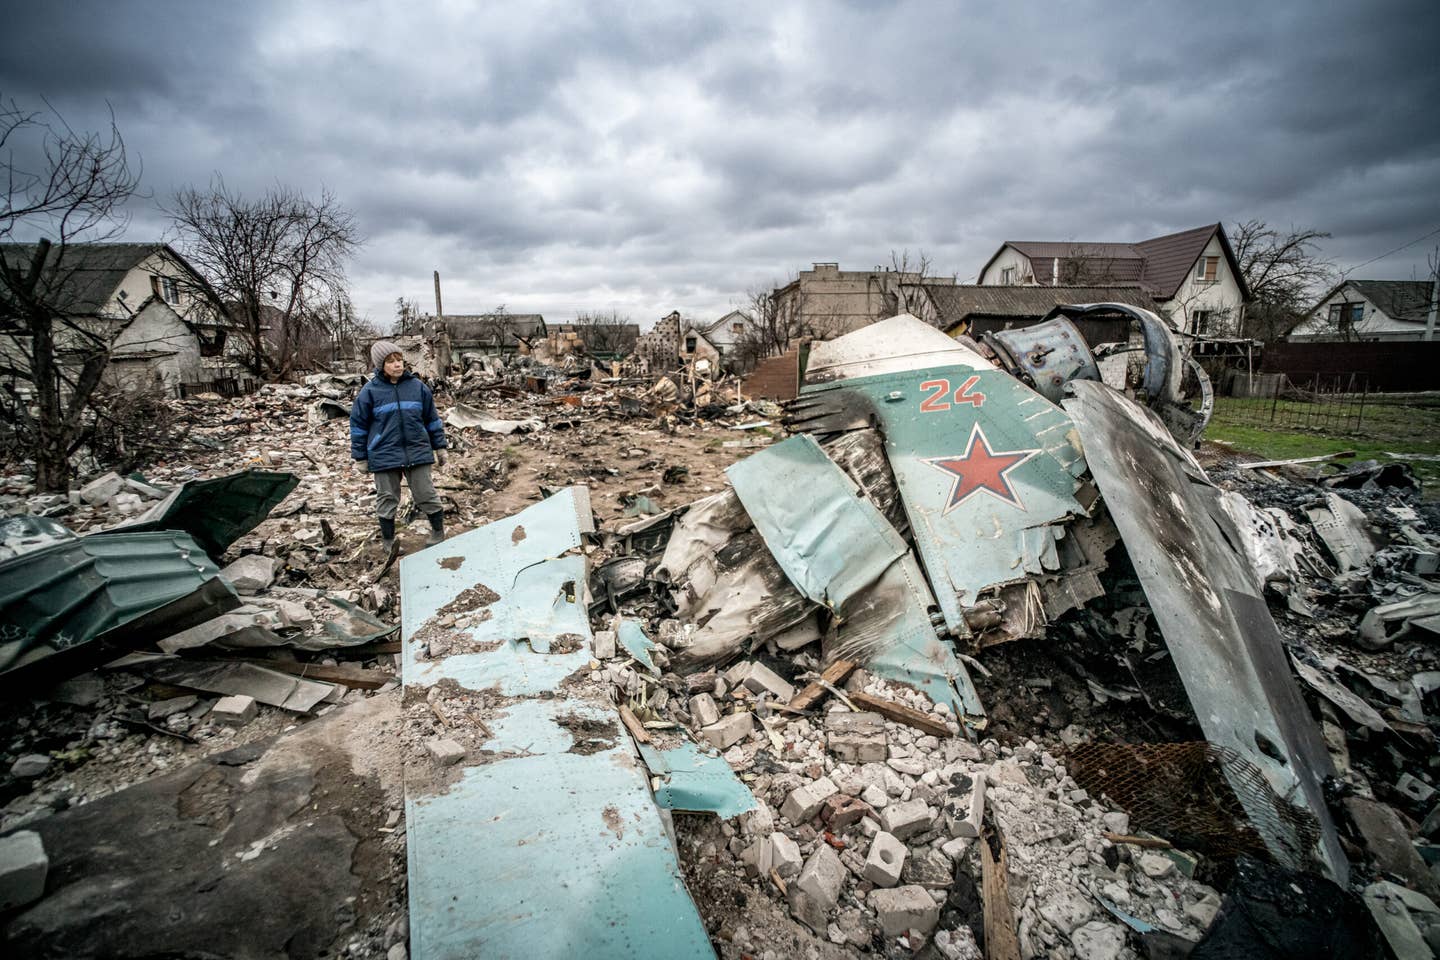 The wreckage of a Su-34 claimed shot down by Ukrainian air defenses crashed in a residential area of Chernihiv. <em>Photo by: Nicola Marfisi/AGF/Universal Images Group via Getty Images</em>